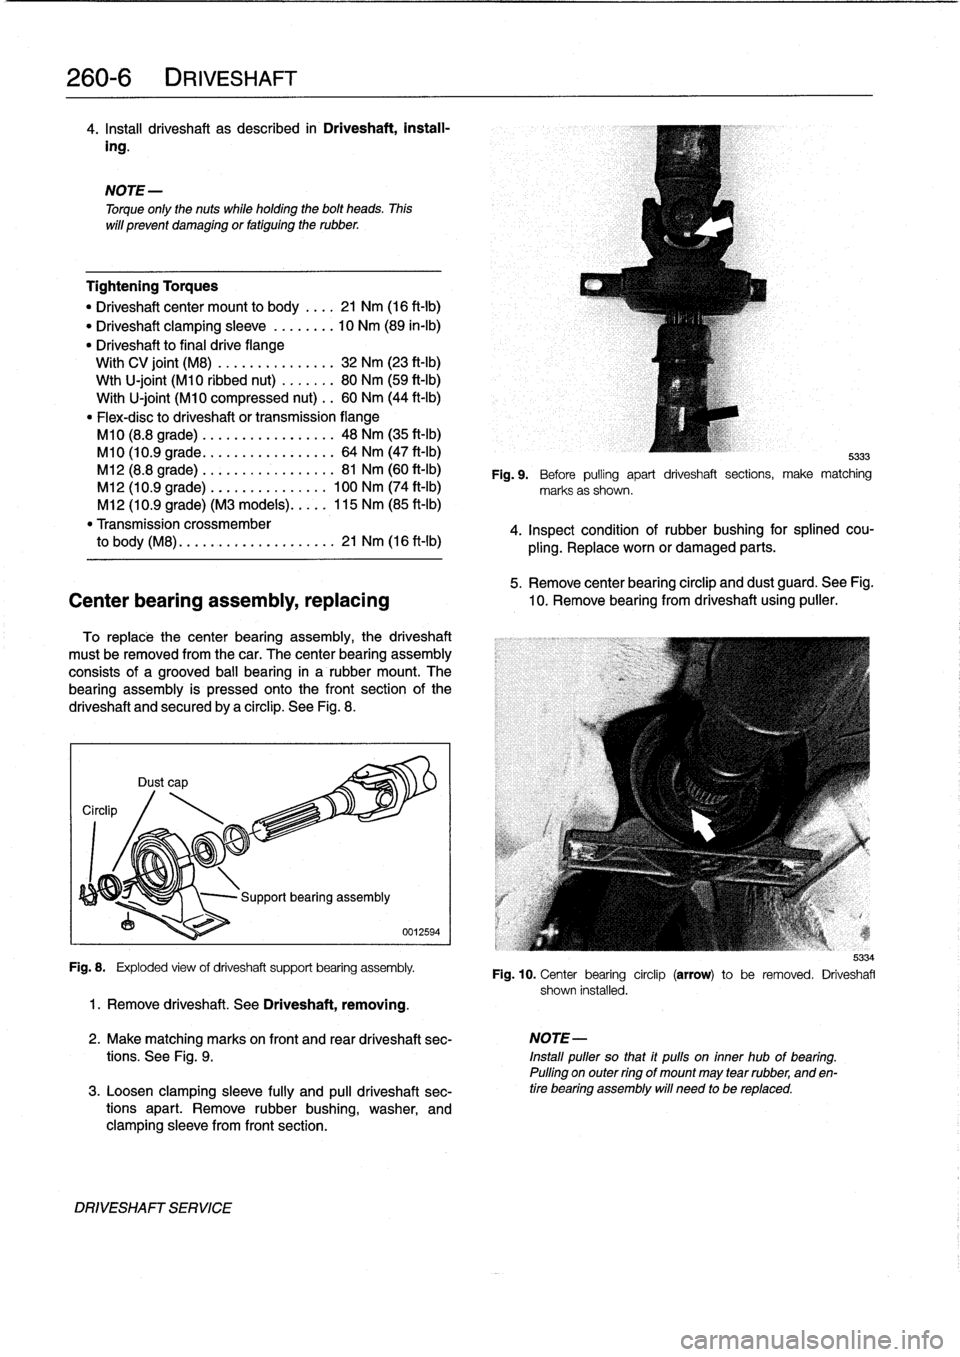 BMW M3 1993 E36 Workshop Manual 
260-
6
DRIVESHAFT

4
.
Insta¡¡
driveshaft
as
described
in
Driveshaft,
install-

ing
.

Tightening
Torques

"
Driveshaft
center
mount
to
body
.
...
21
Nm
(16
ft-Ib)

"
Driveshaft
clamping
sleeve
...